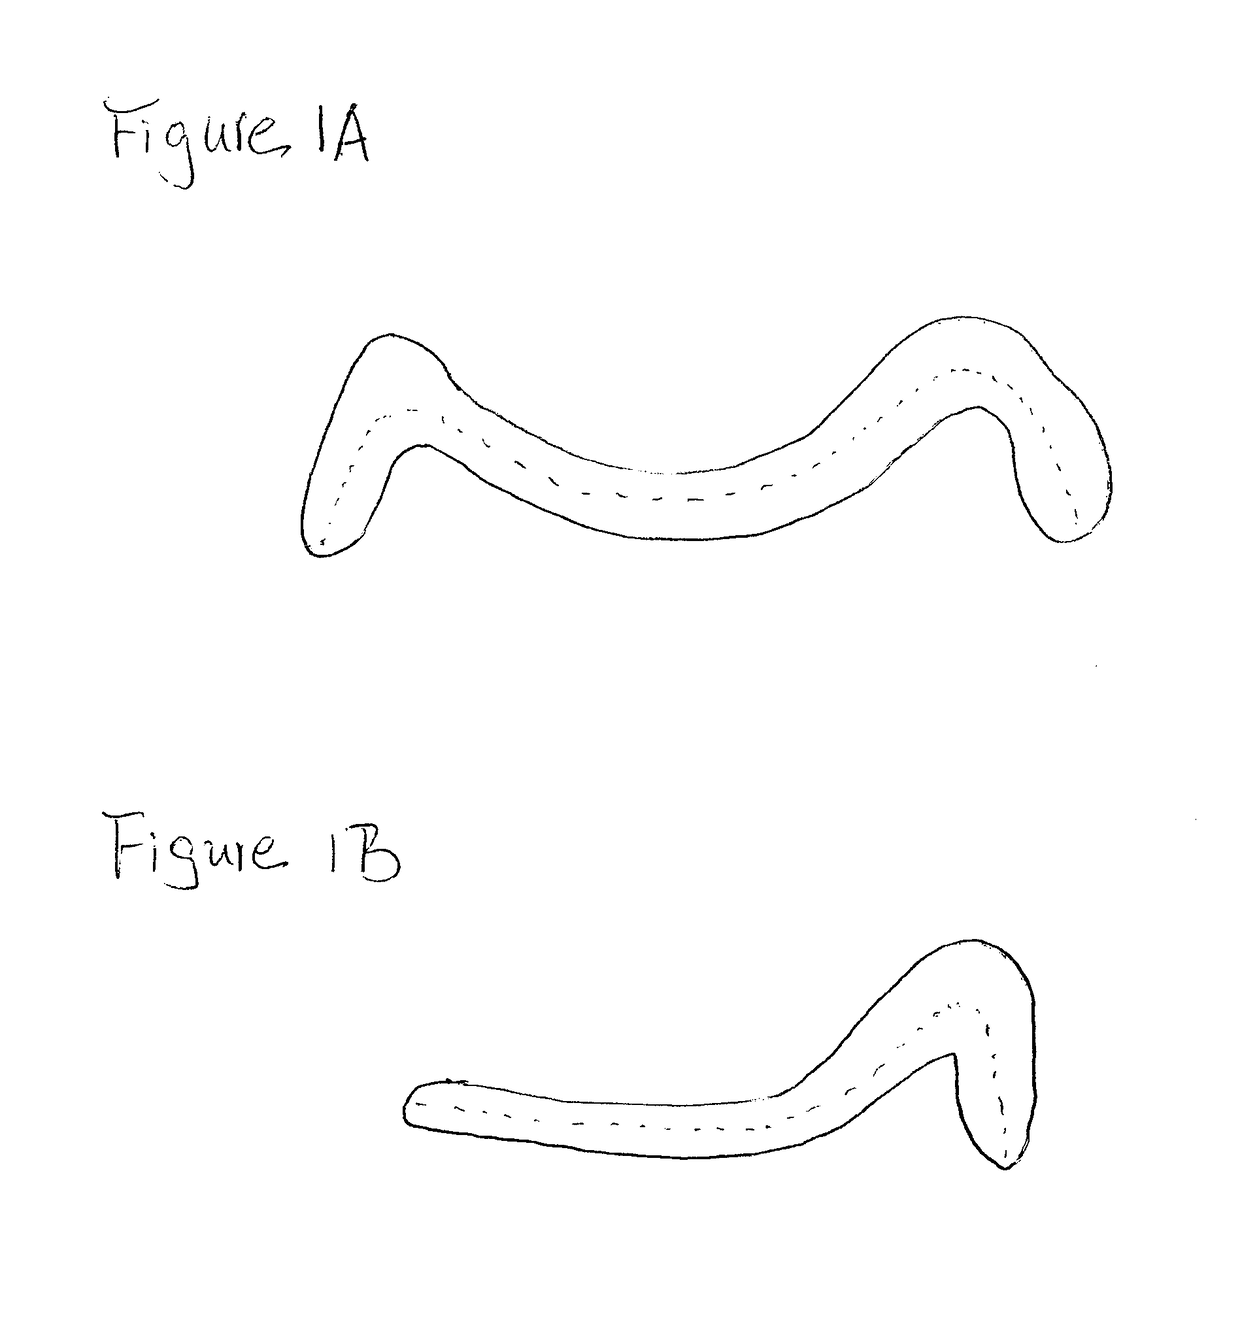 Three dimensional fabricating material systems and methods for producing layered dental products